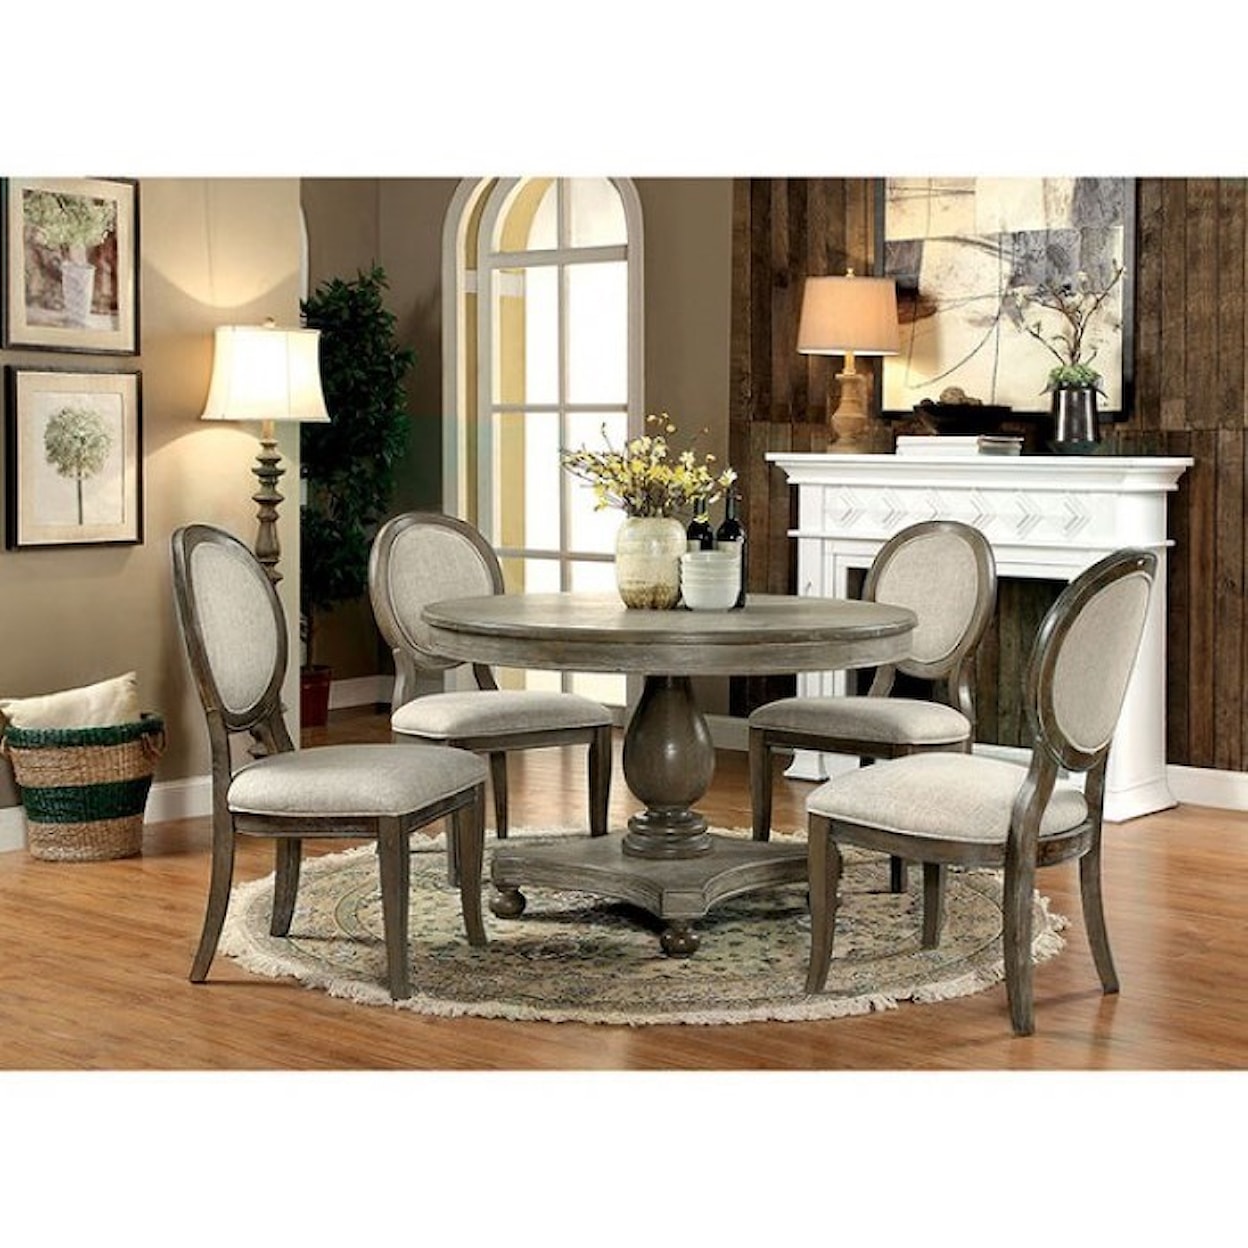 Furniture of America Kathryn Round Dining Table